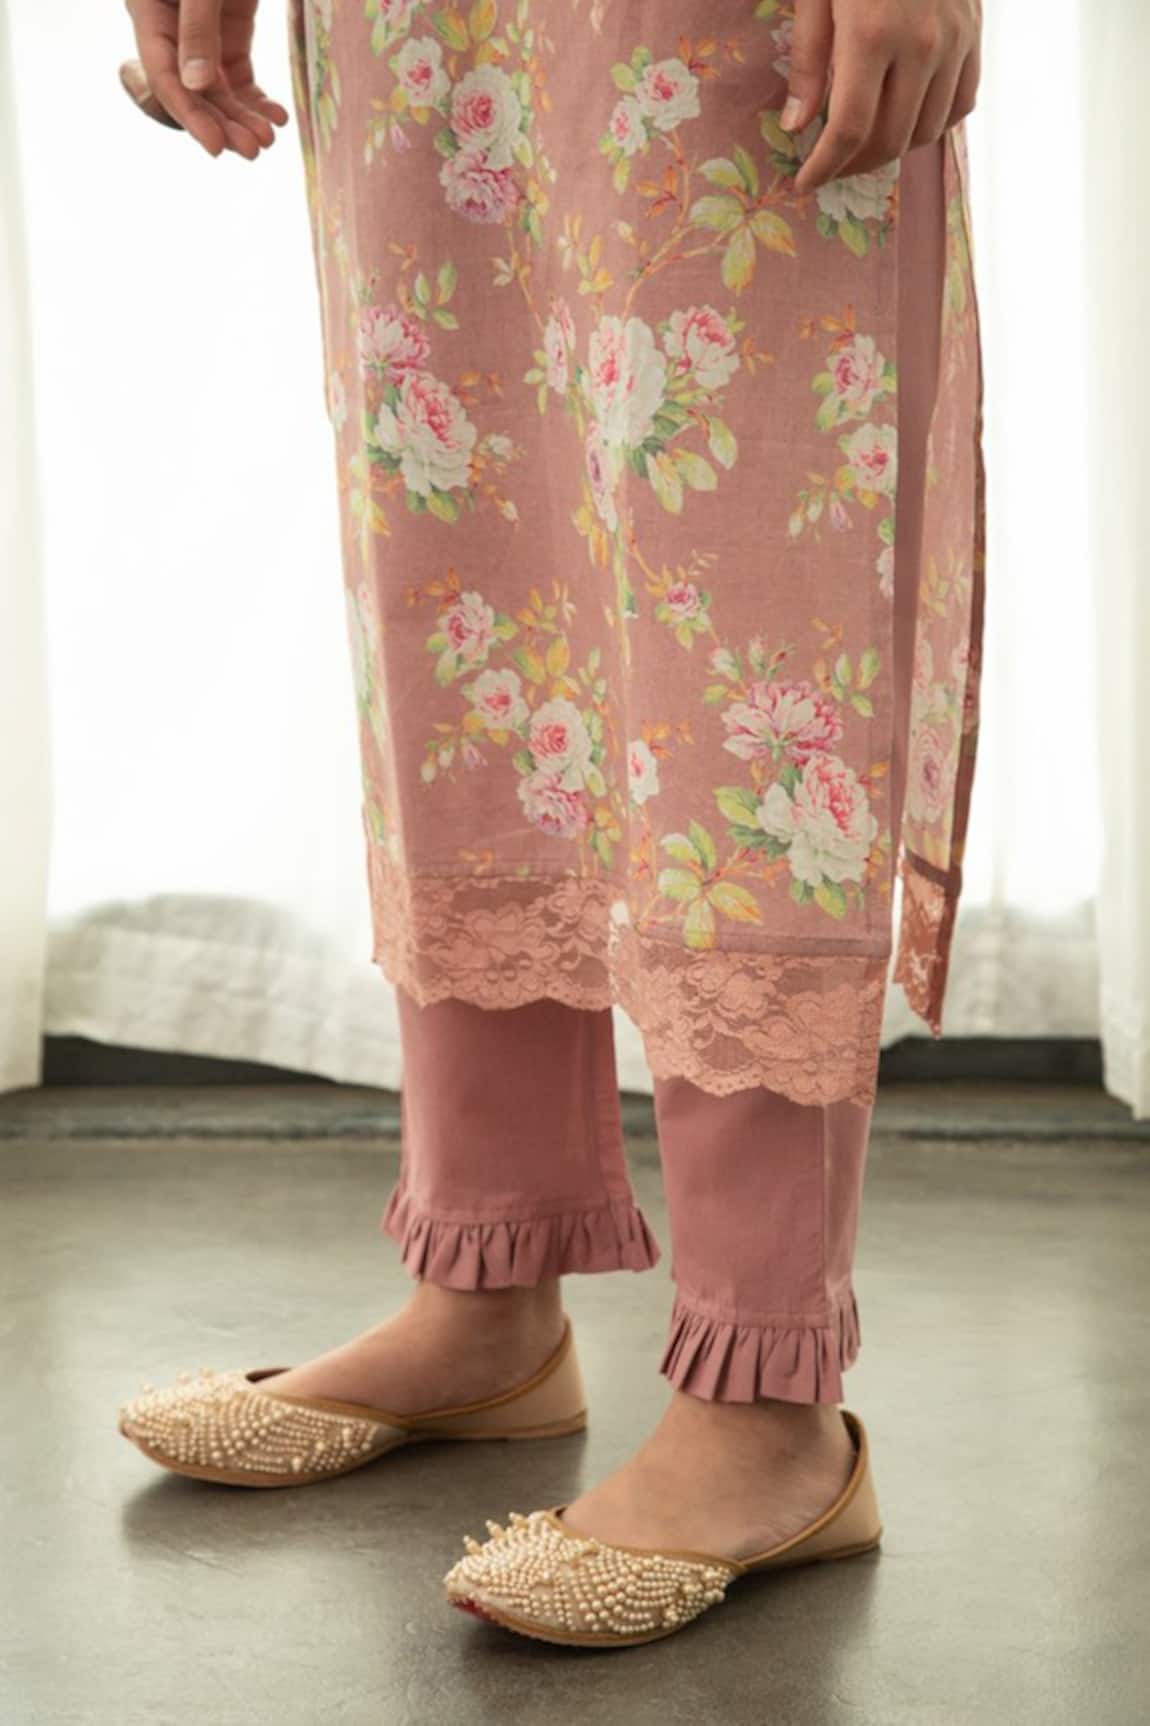 What type of Kurtis will better go with Palazzo pants?